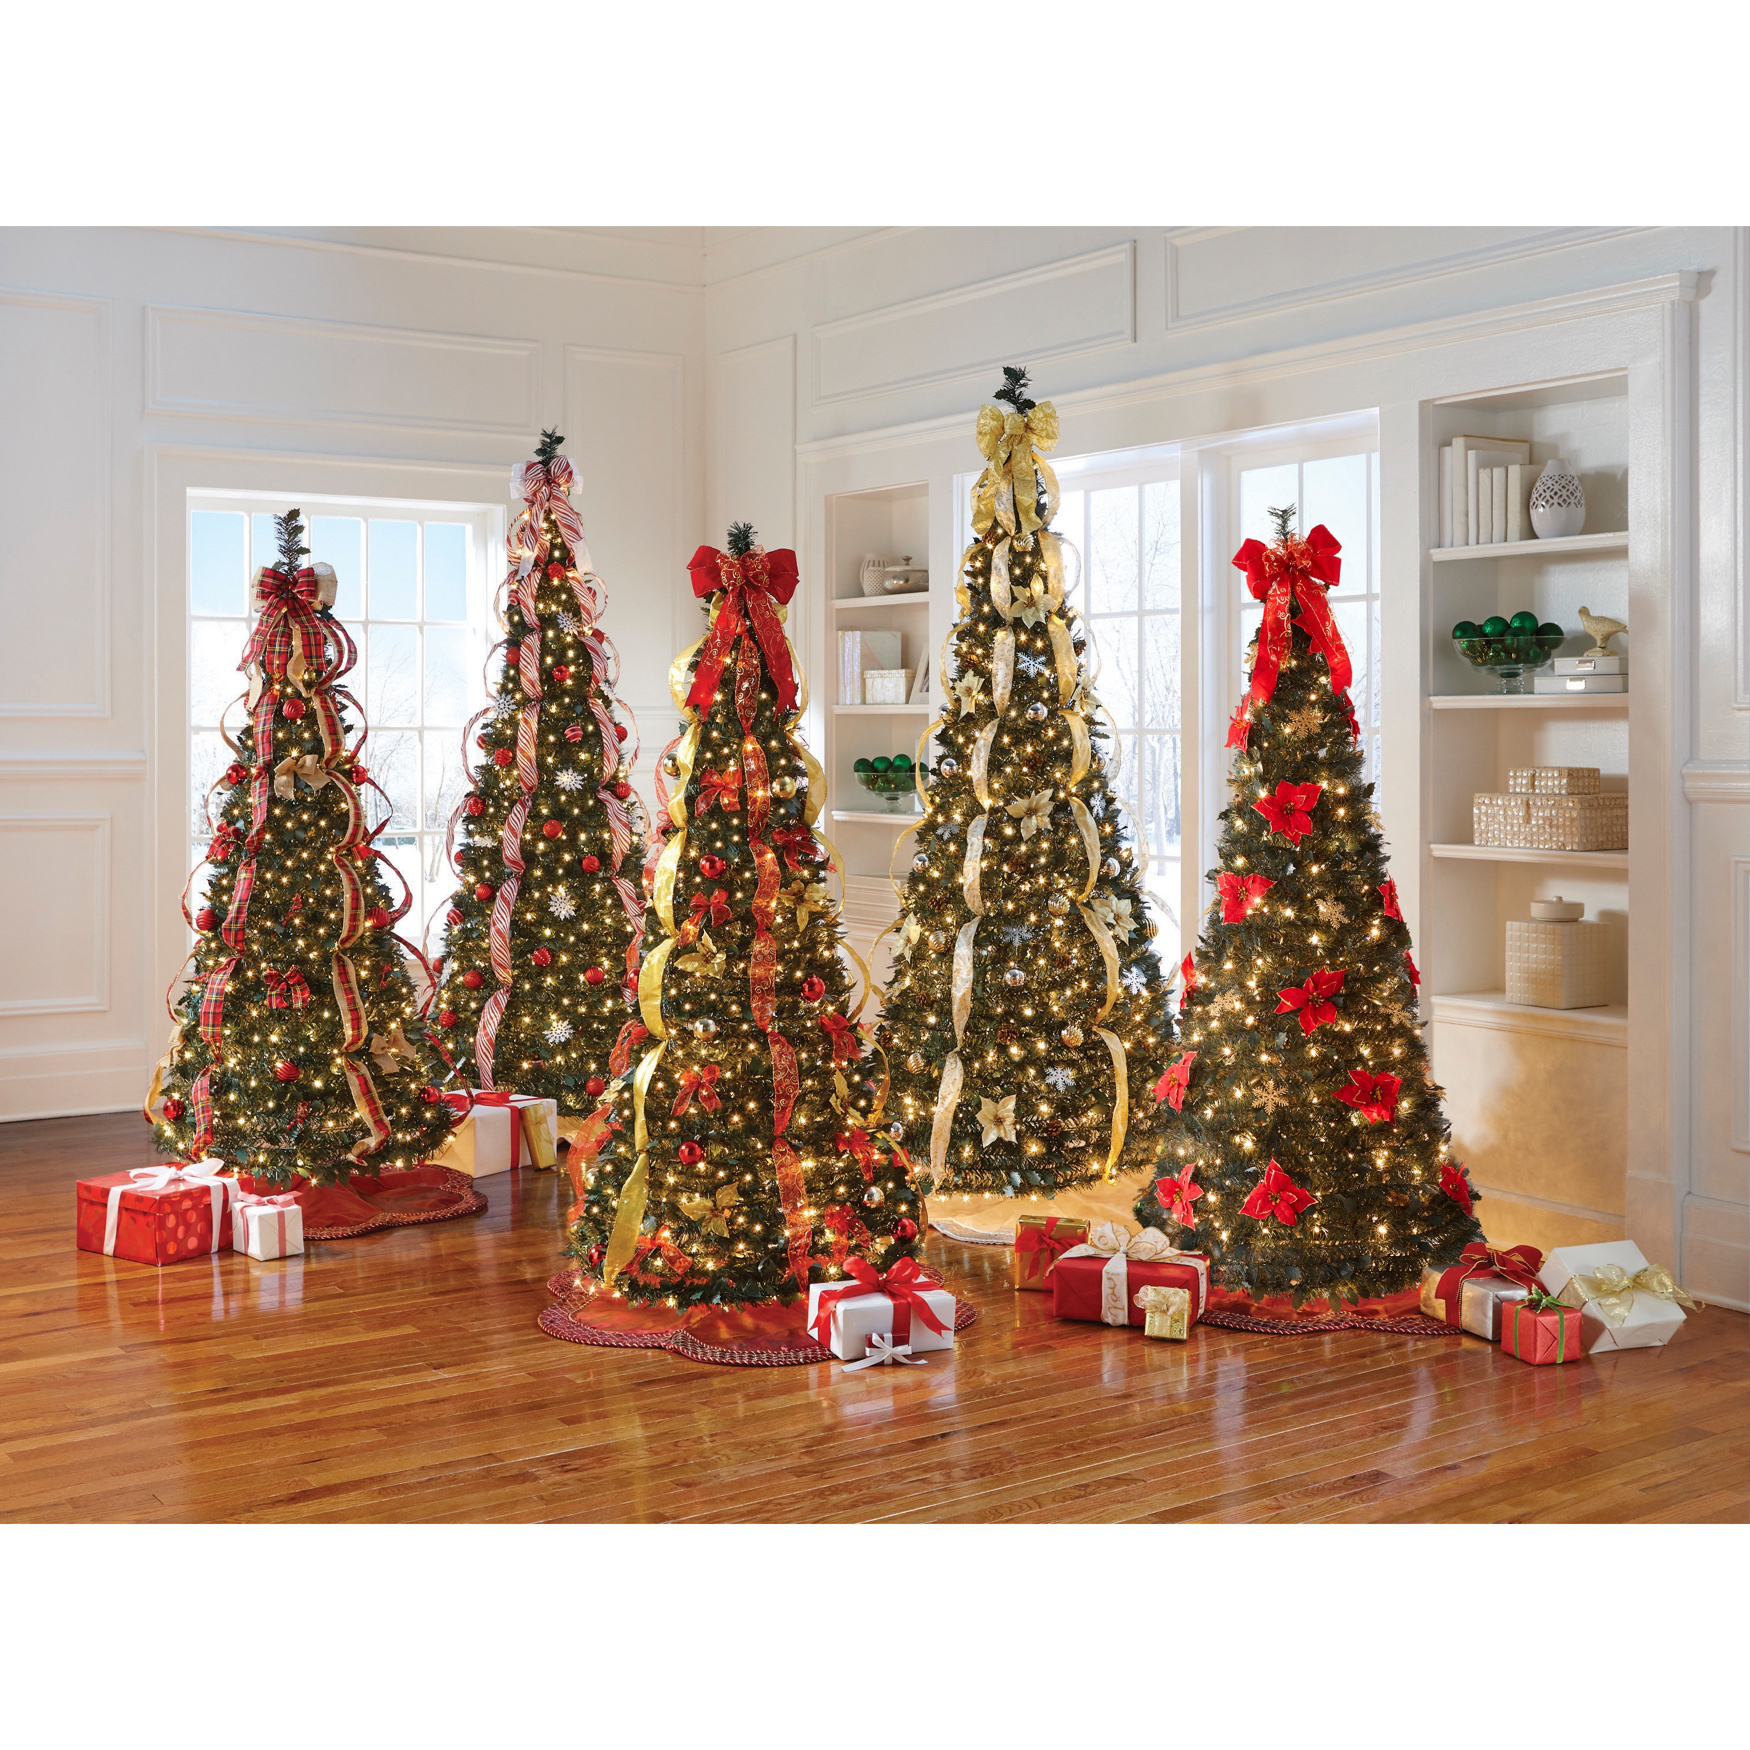 Fully Decorated Pre-Lit 6-Ft. Pop-Up Christmas Tree | Brylane